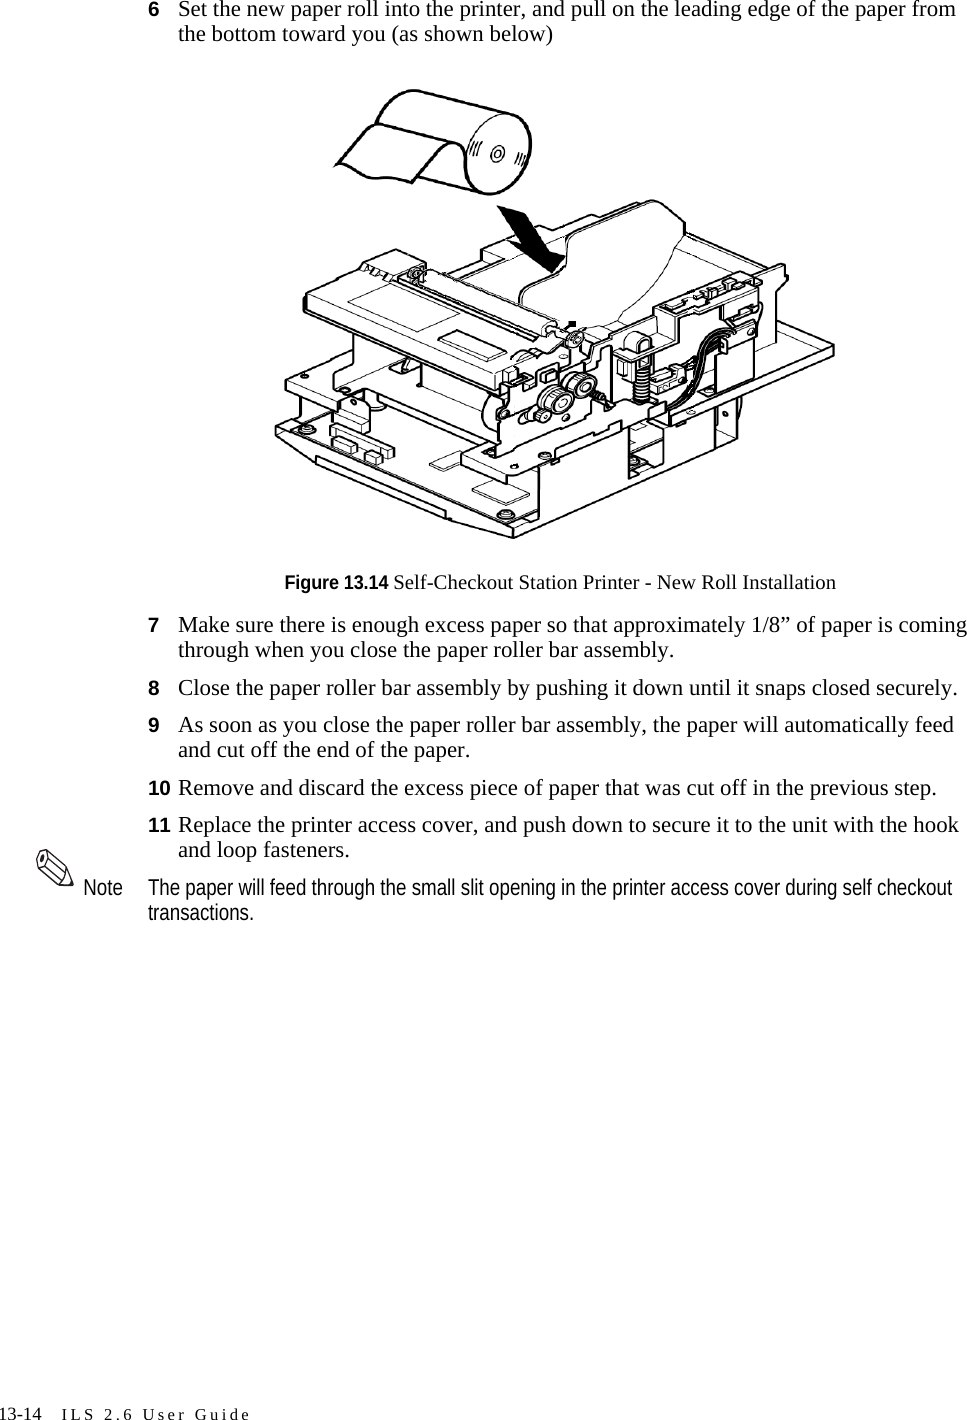 13-14 ILS 2.6 User Guide6Set the new paper roll into the printer, and pull on the leading edge of the paper from the bottom toward you (as shown below)Figure 13.14 Self-Checkout Station Printer - New Roll Installation7Make sure there is enough excess paper so that approximately 1/8” of paper is coming through when you close the paper roller bar assembly.8Close the paper roller bar assembly by pushing it down until it snaps closed securely.9As soon as you close the paper roller bar assembly, the paper will automatically feed and cut off the end of the paper.10 Remove and discard the excess piece of paper that was cut off in the previous step.11 Replace the printer access cover, and push down to secure it to the unit with the hook and loop fasteners.Note The paper will feed through the small slit opening in the printer access cover during self checkout transactions.